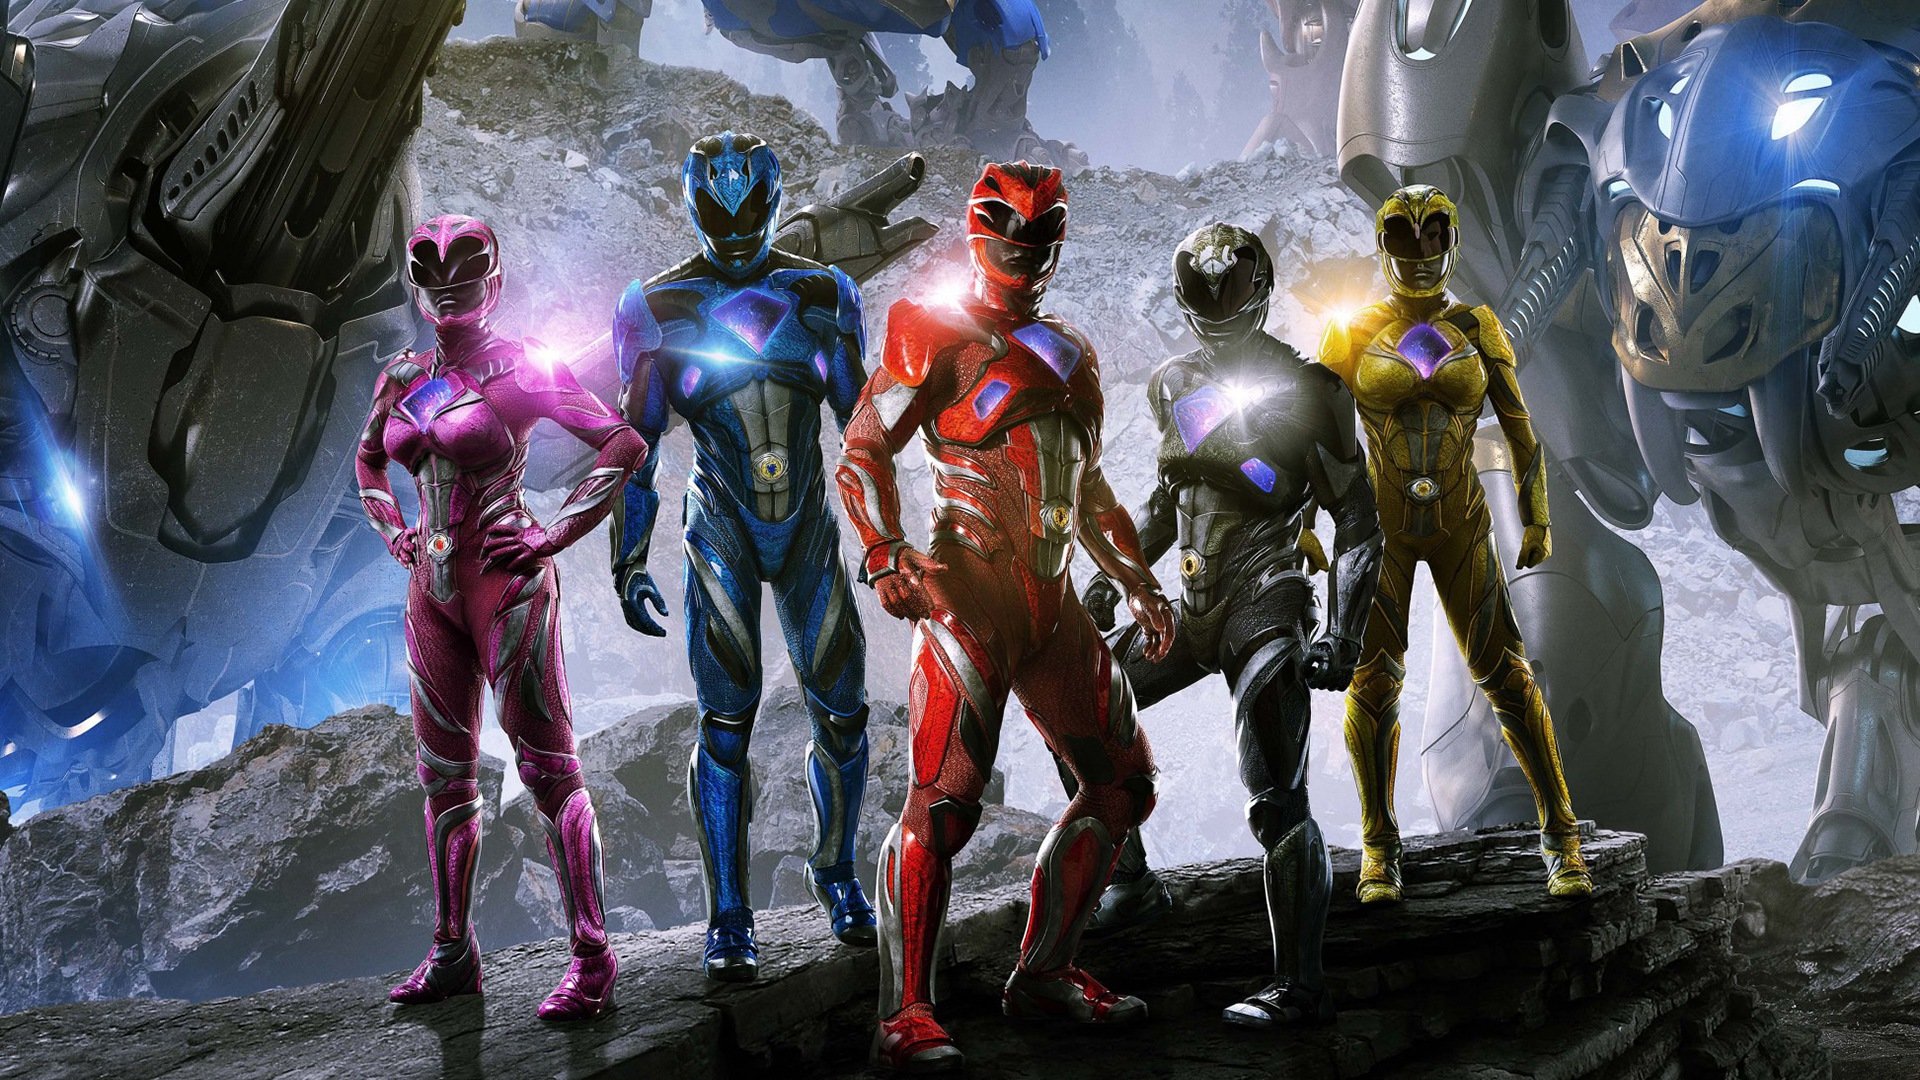 Awesome Power Rangers (2017) movie free wallpaper ID:110612 for full hd 1920x1080 PC